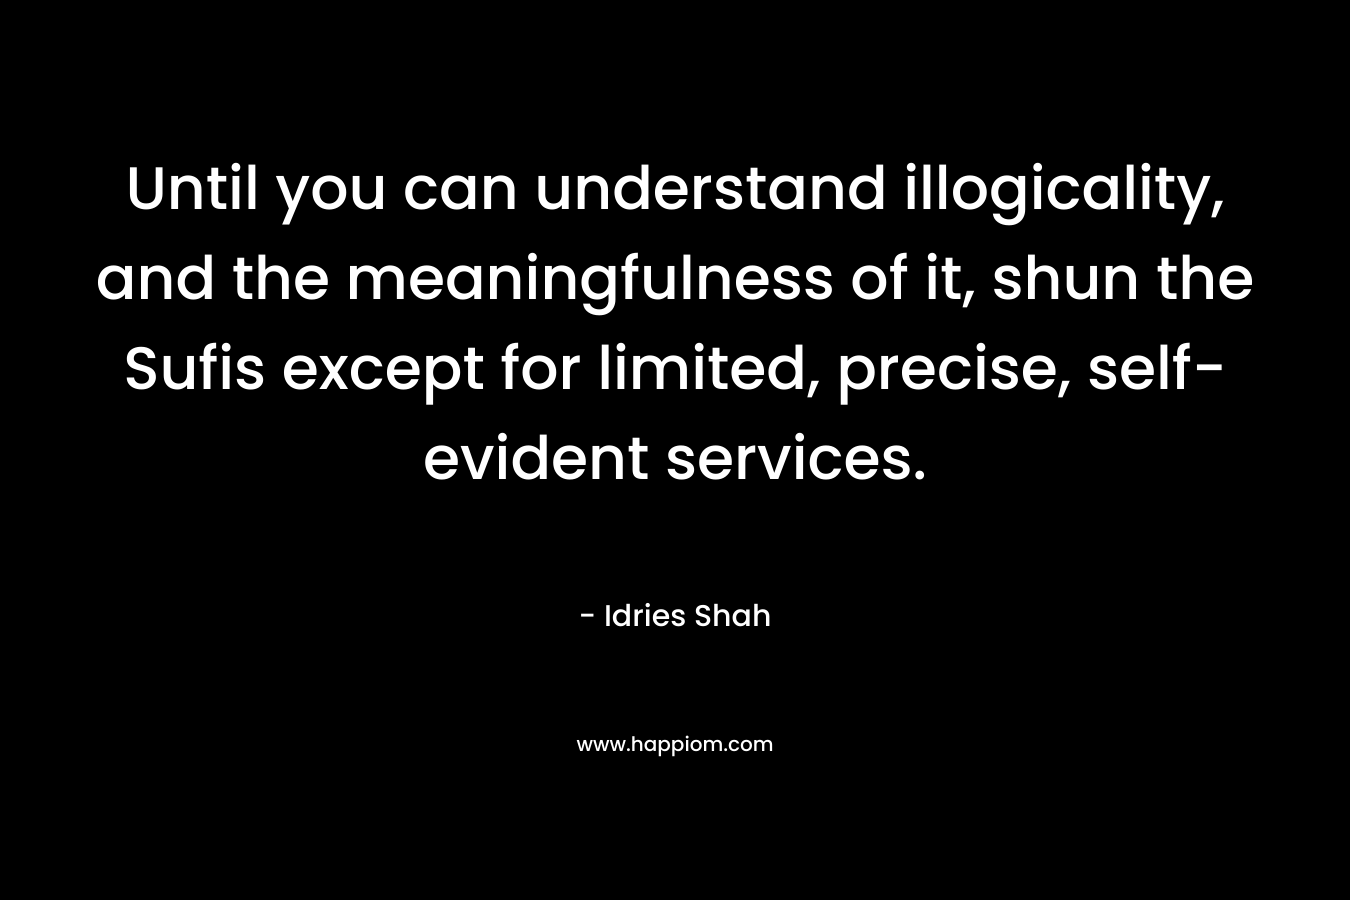 Until you can understand illogicality, and the meaningfulness of it, shun the Sufis except for limited, precise, self-evident services.